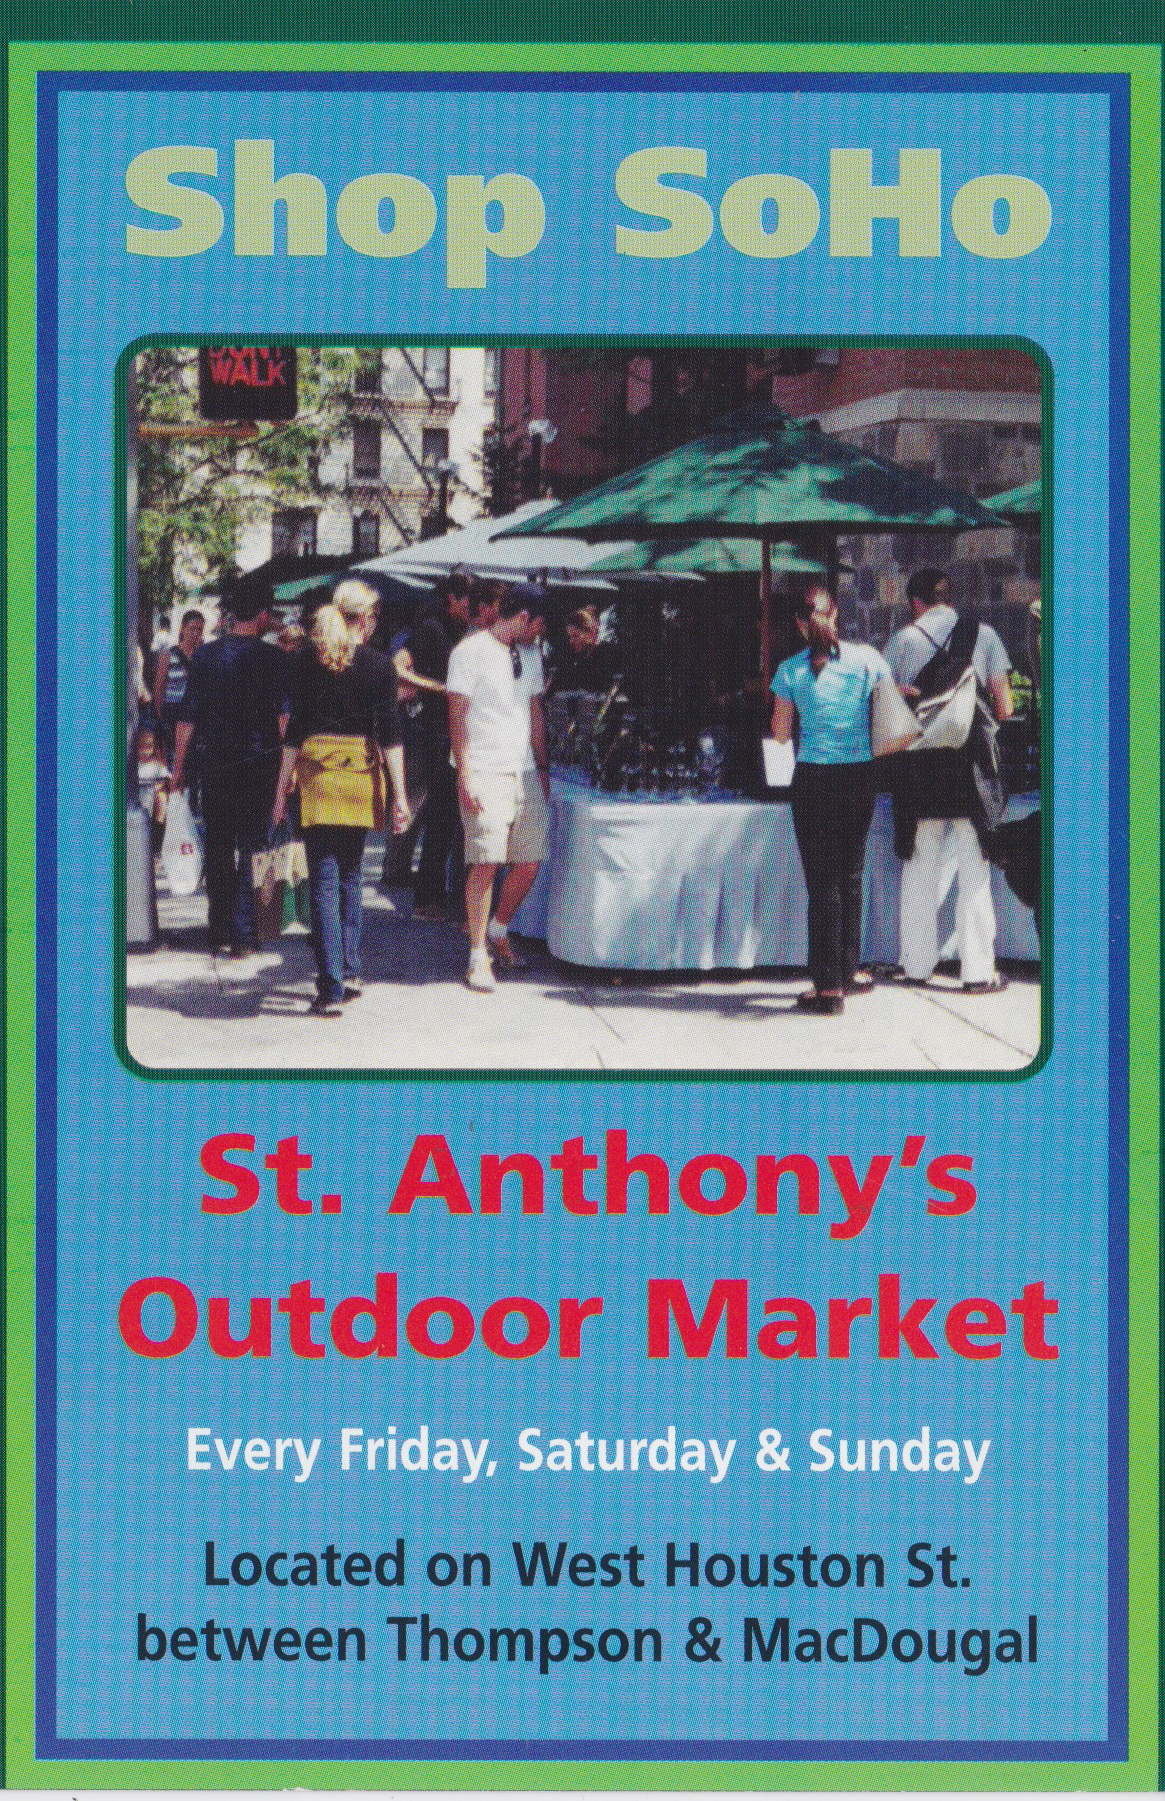 St. Anthony's Outdoor Market Postcard